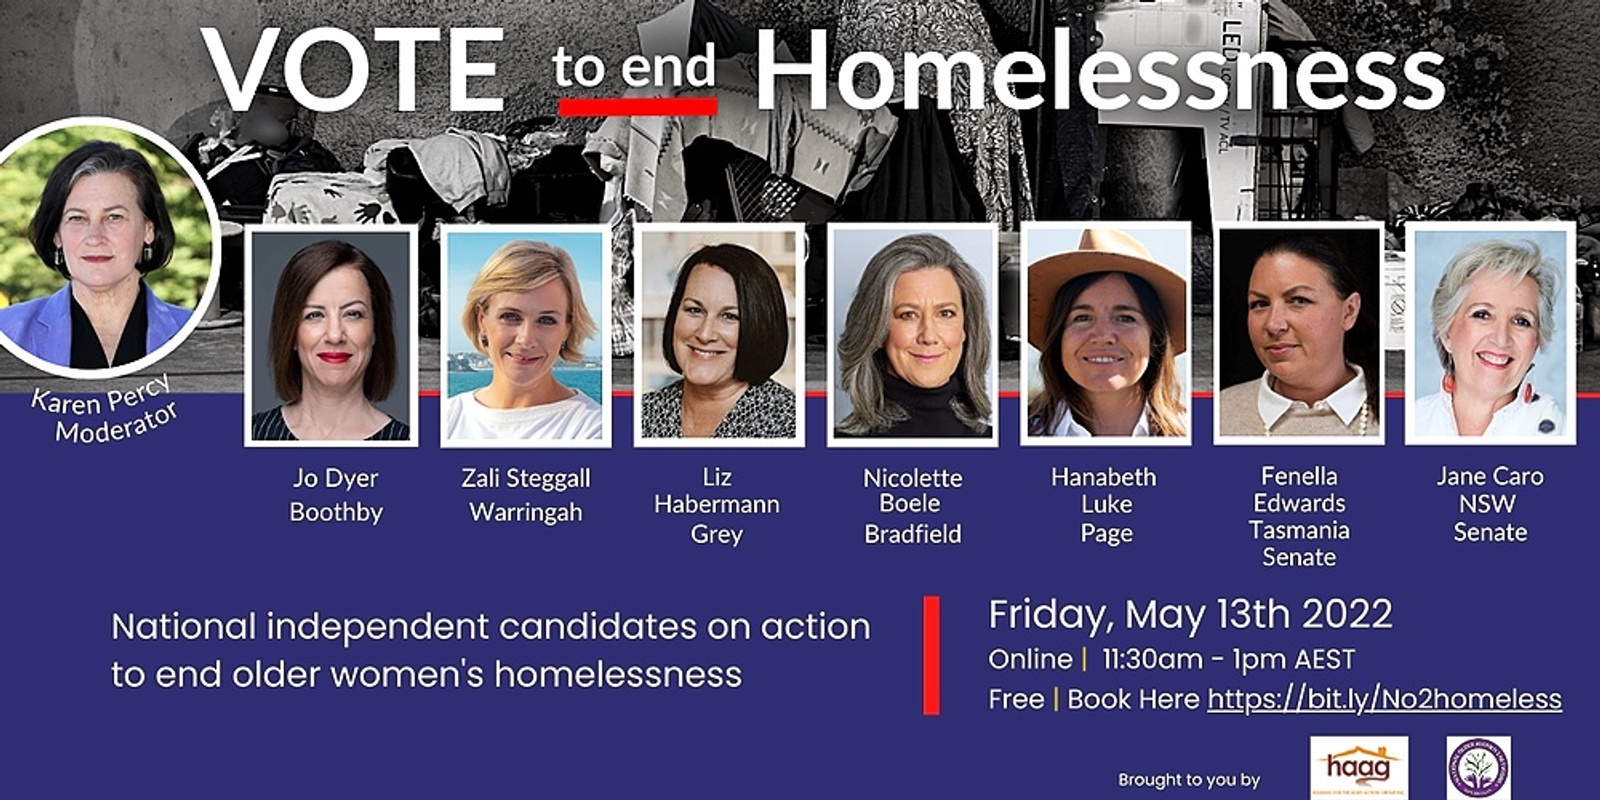 Vote to end Homelessness: National Independent Candidates on Action to End Homelessness of Older Women